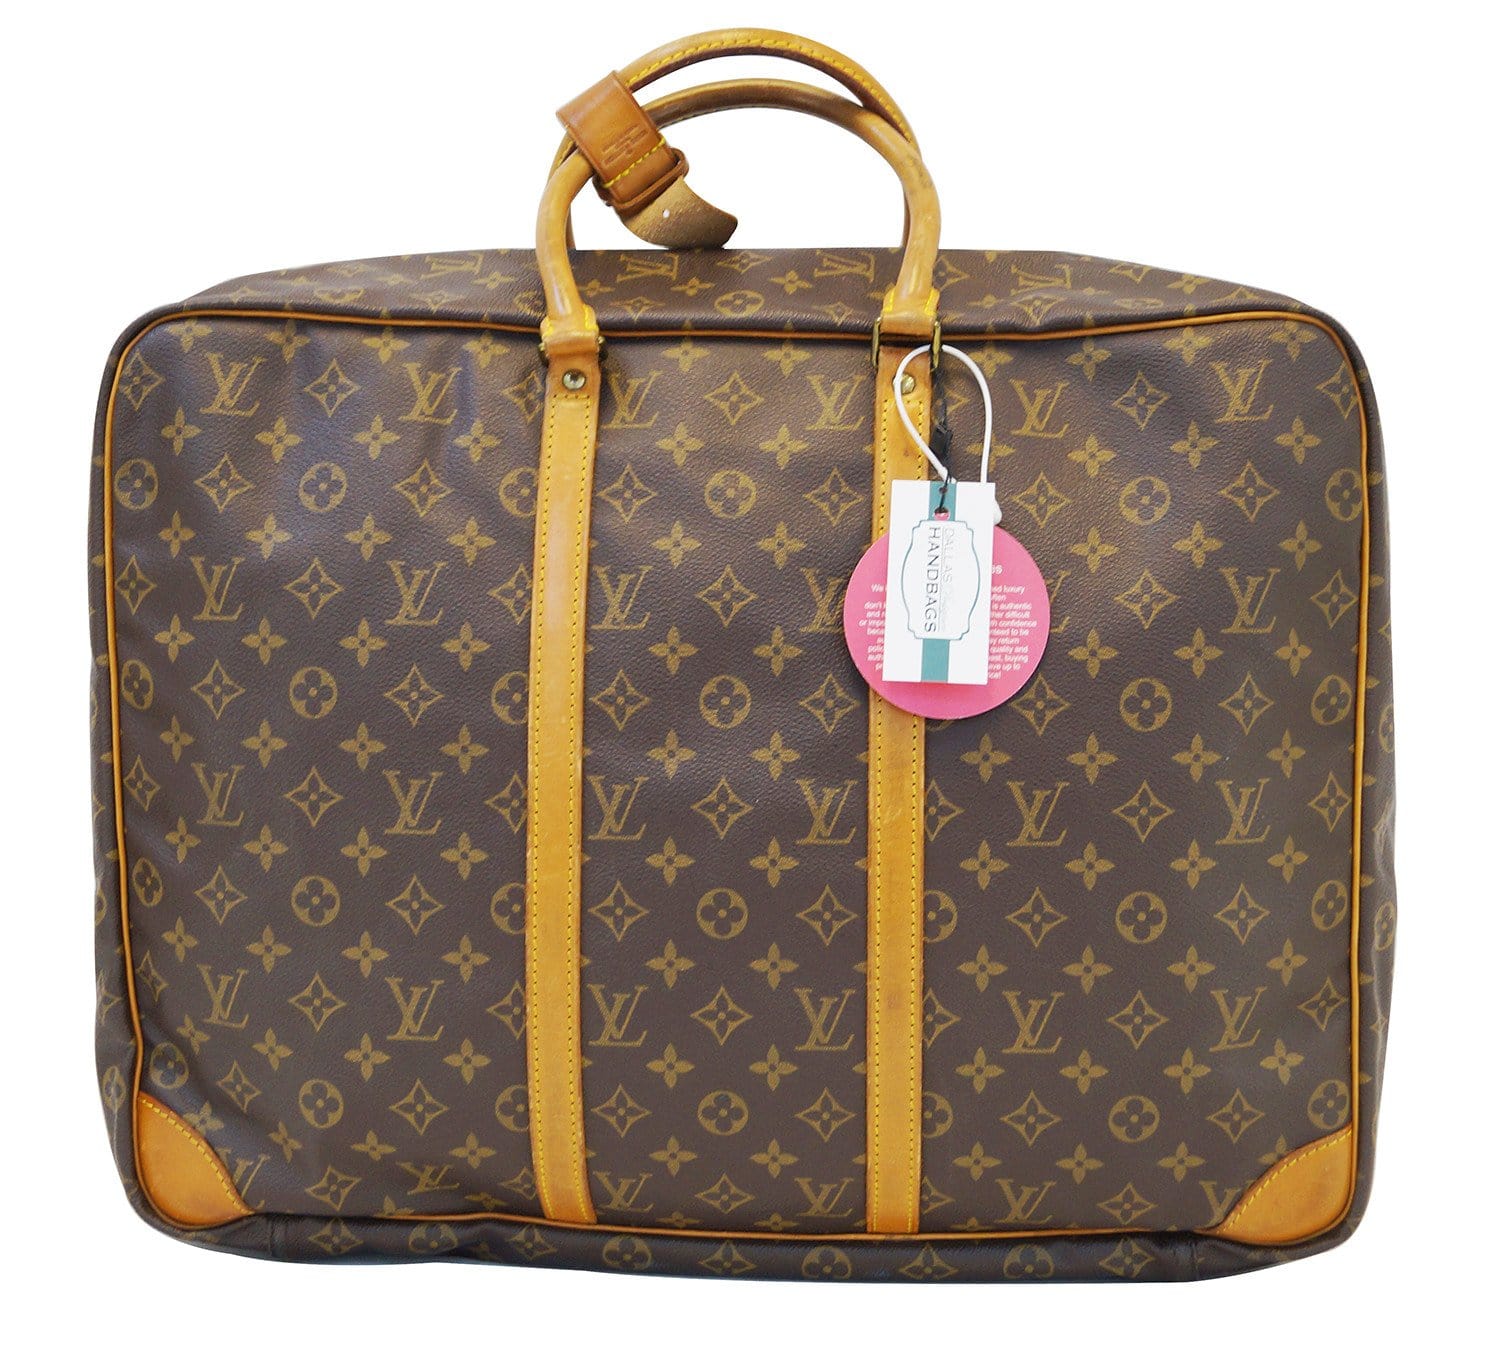 Lot - COLLECTION OF LOUIS VUITTON SOFT CASE LUGGAGE